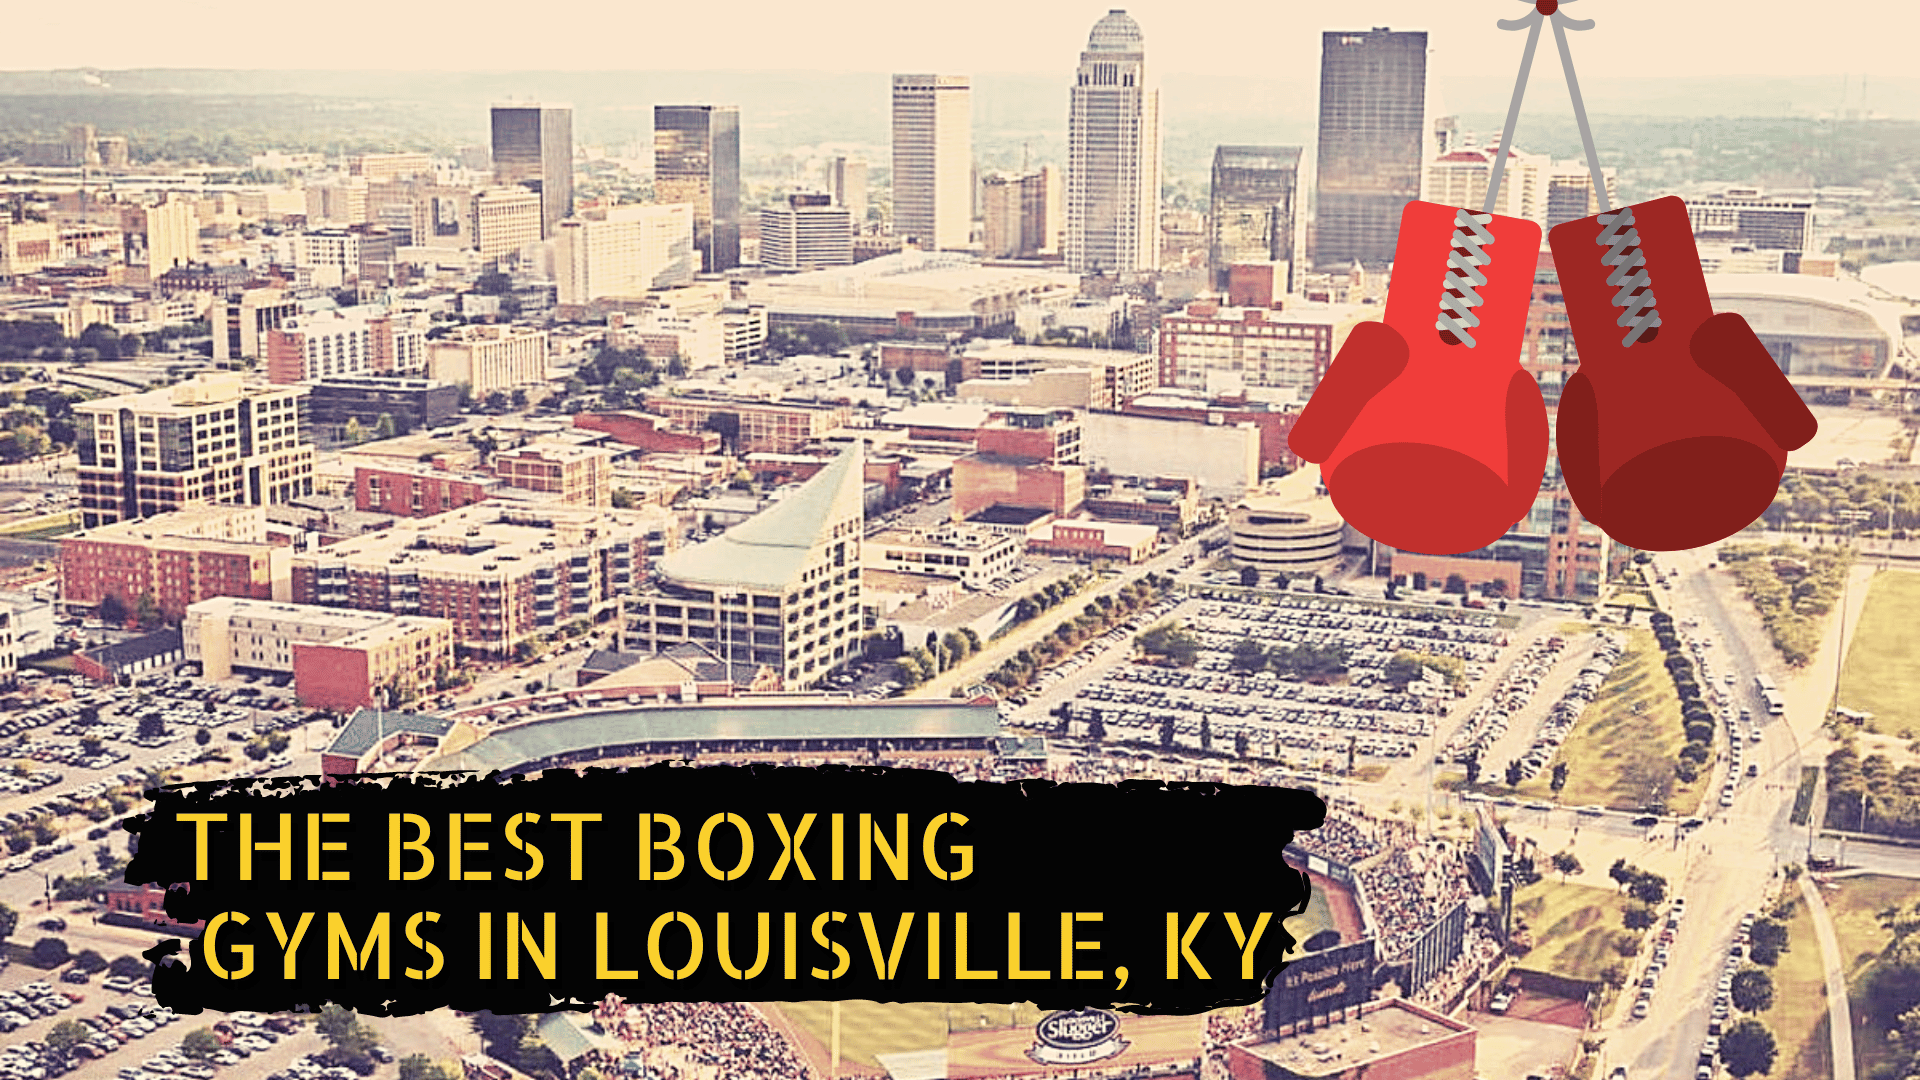 Louisville sky line and some boxing gloves with the title "best boxing gyms in Louisville"